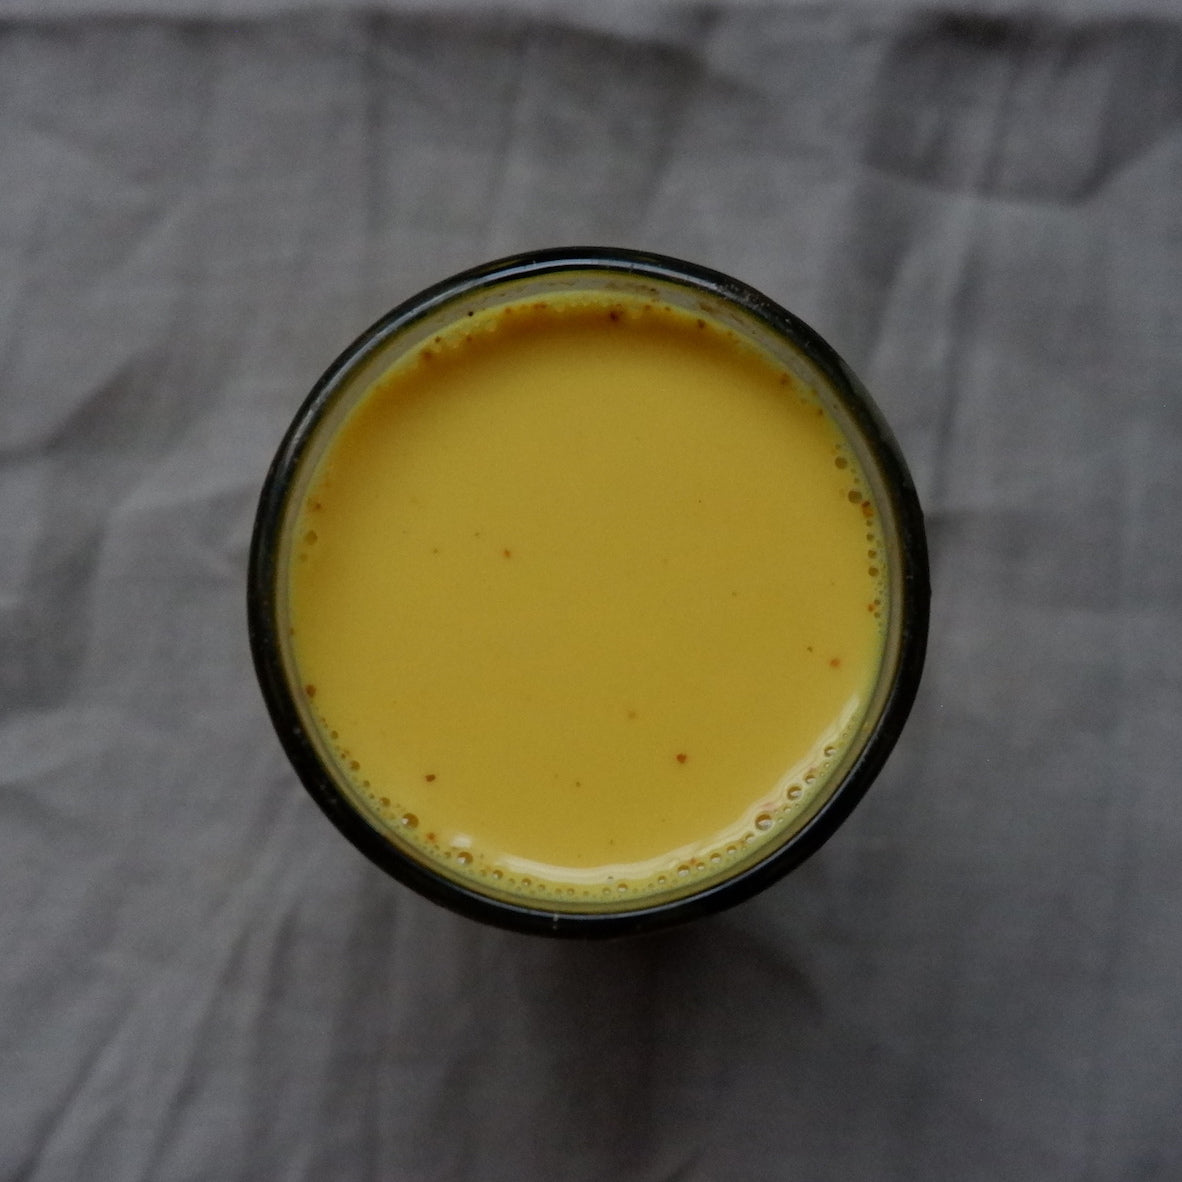 The story behind our Turmeric Latte